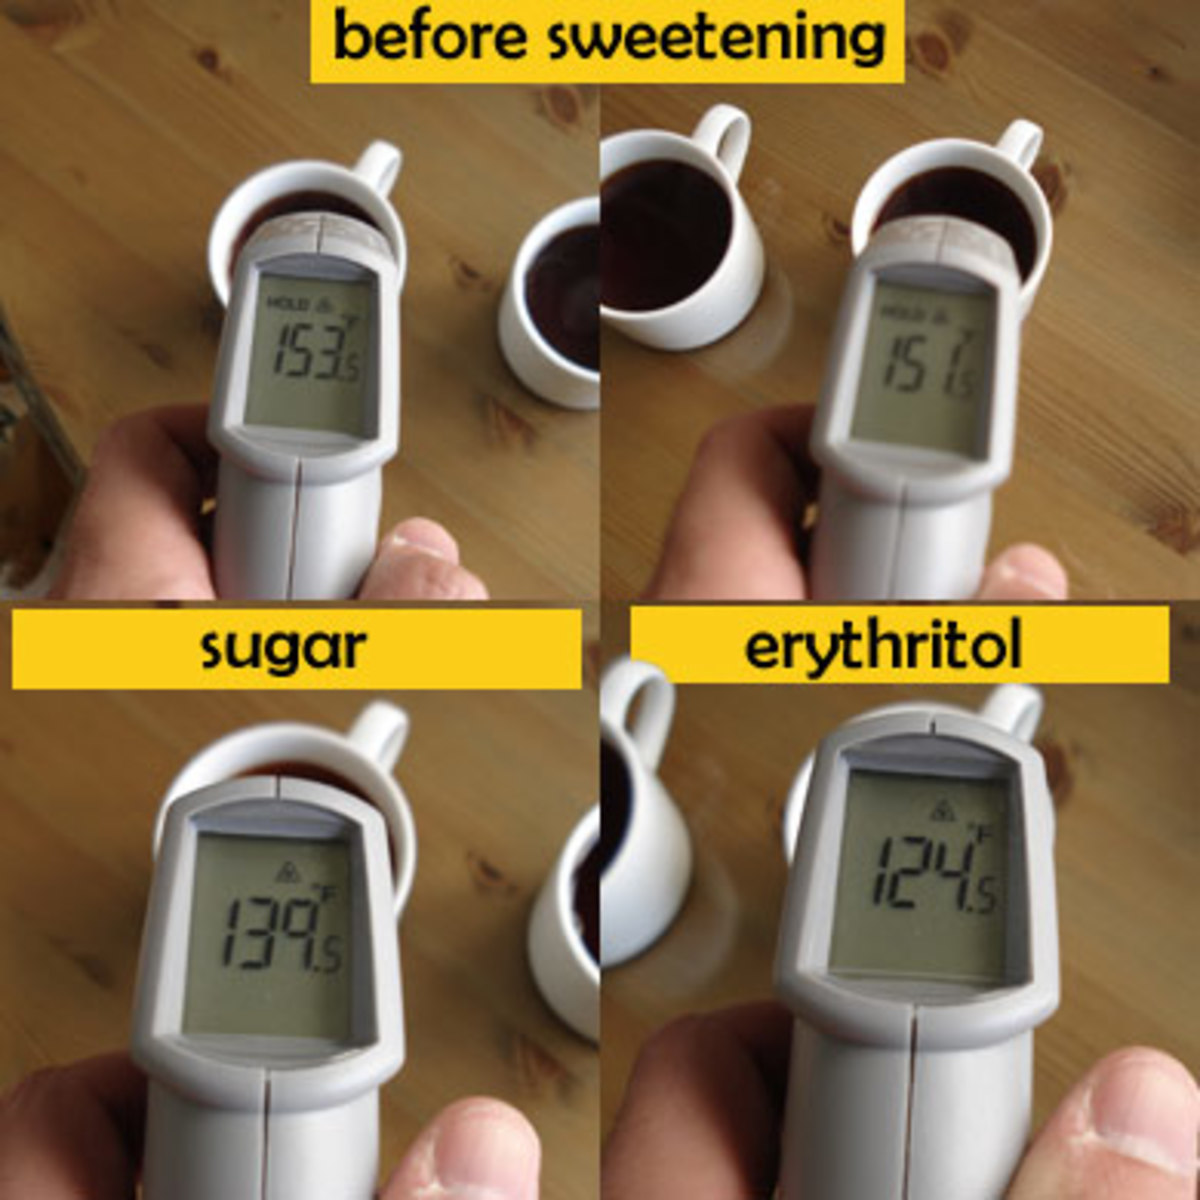 Tea from the same source starts off at about same temperature. Erythritol cools much more than sugar as it dissolves.